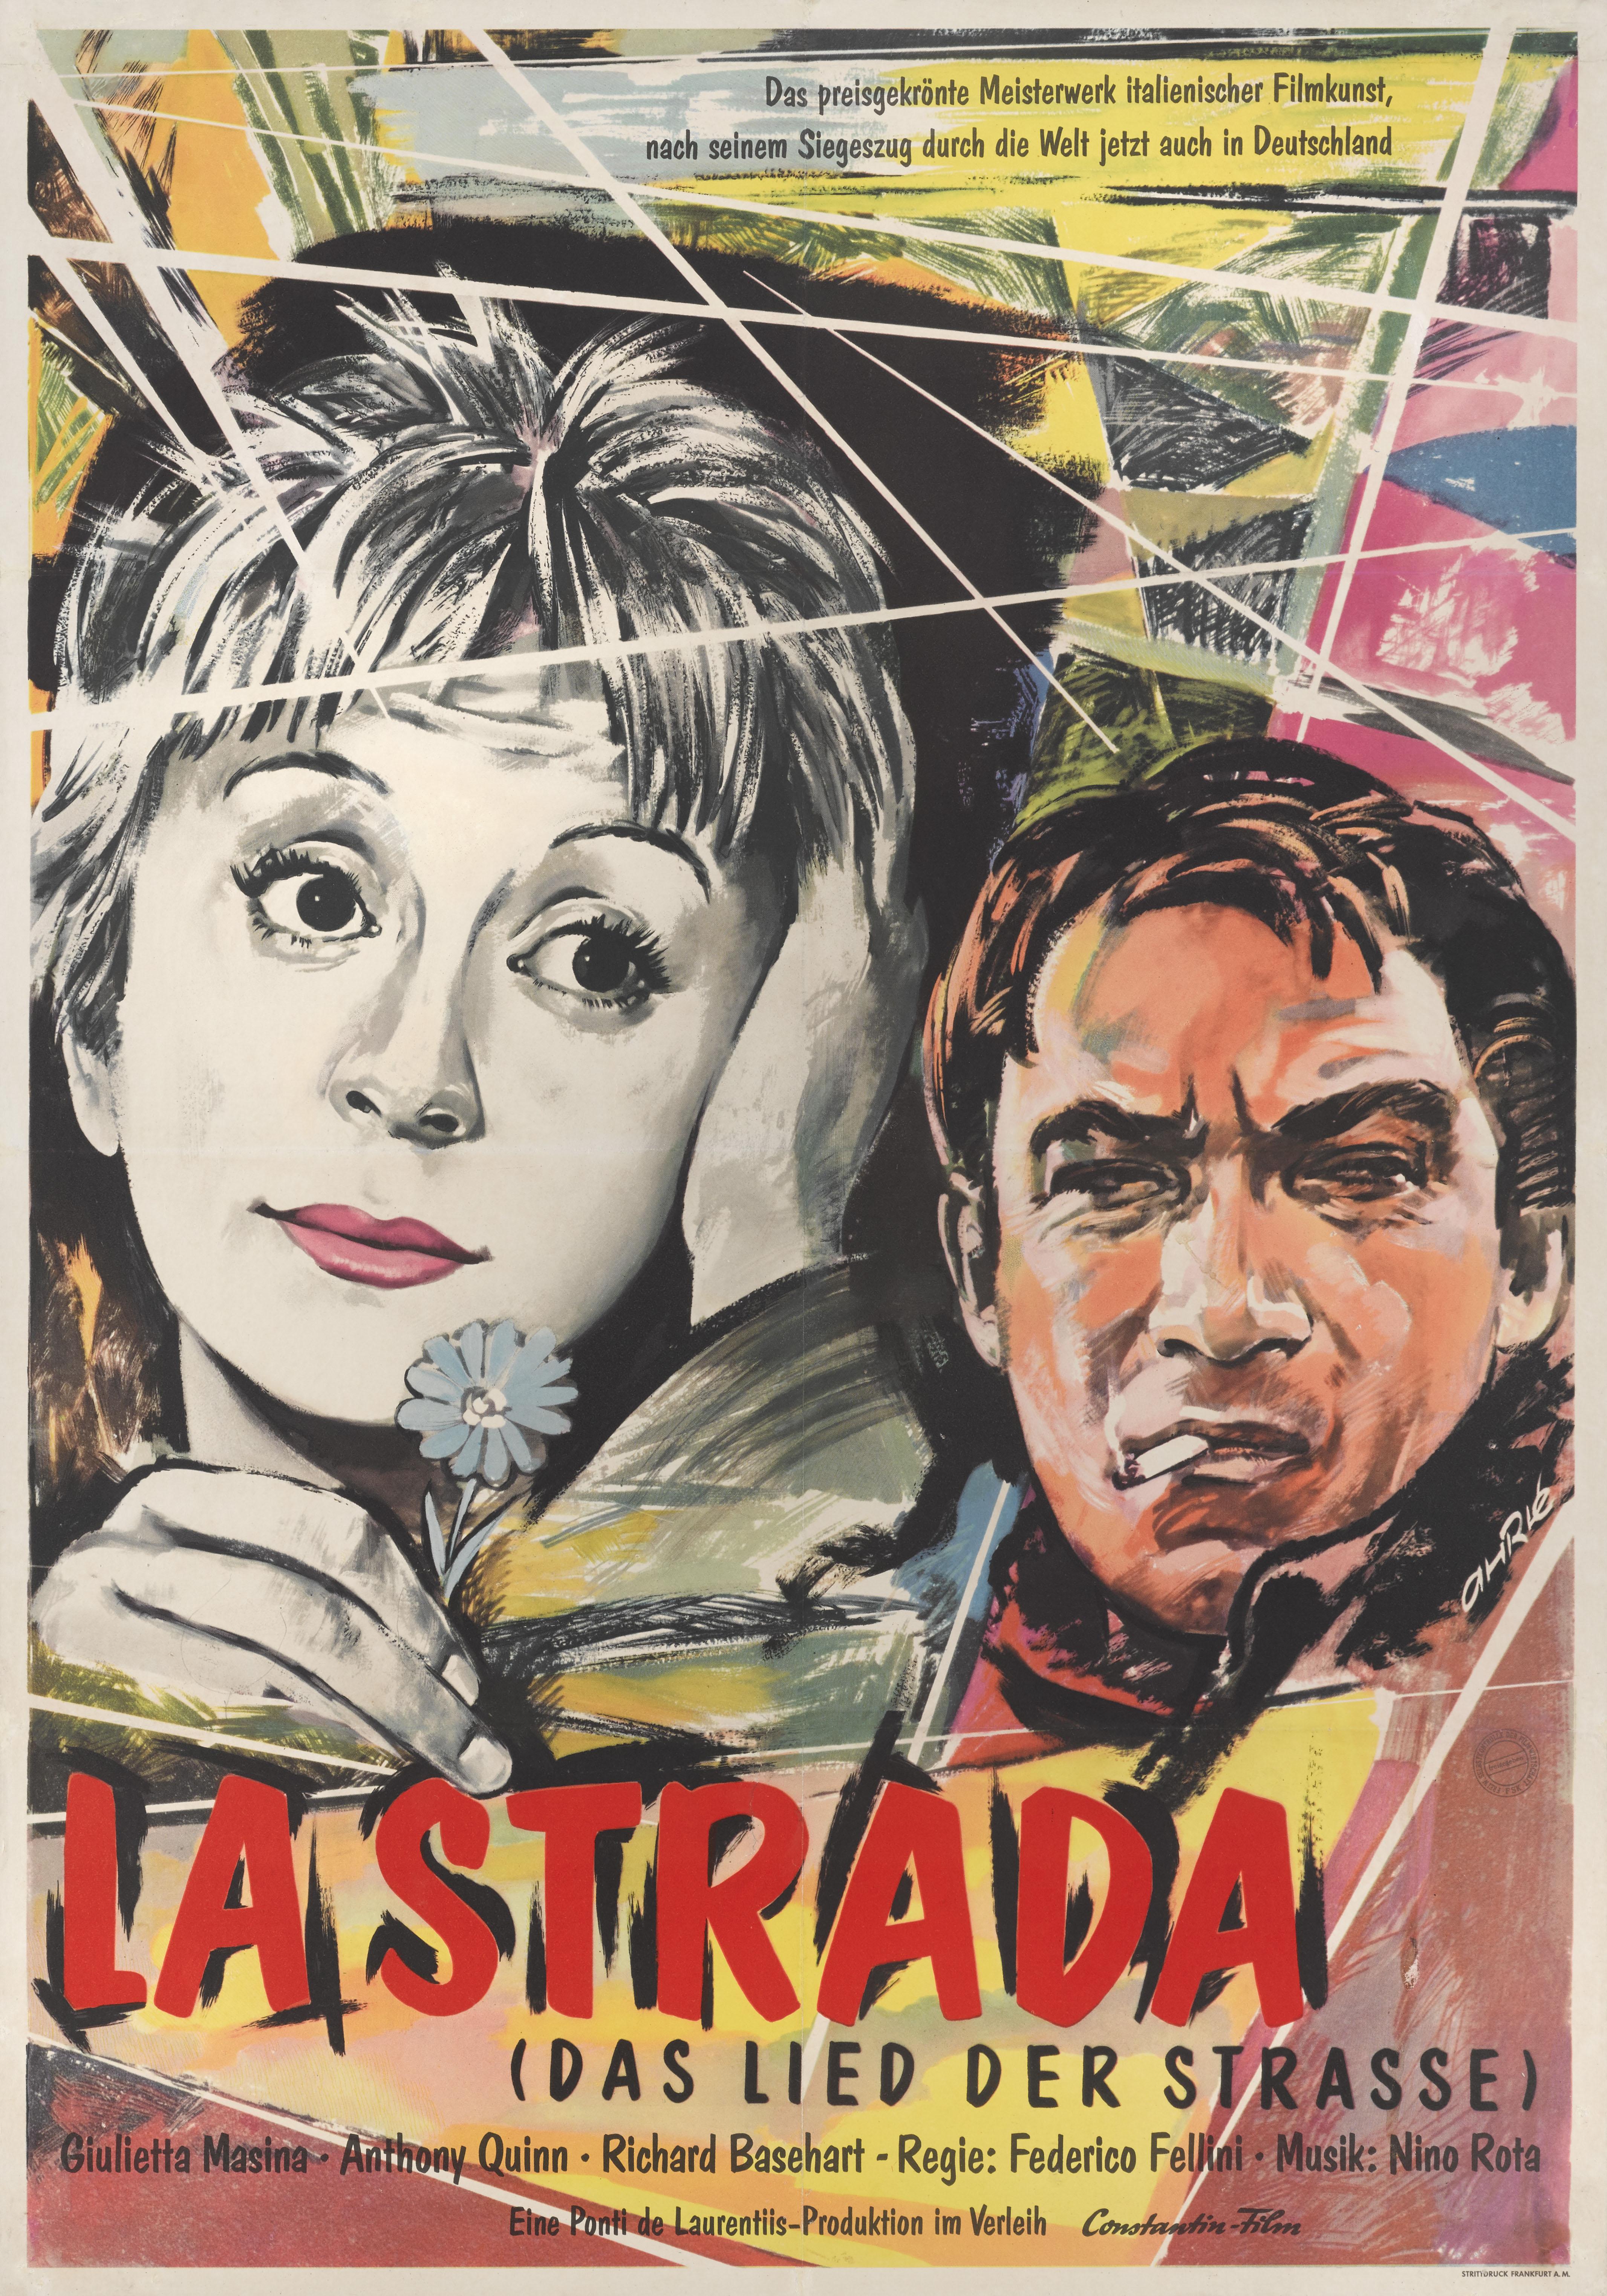 Original German film poster for the Italian drama La Strada 1954.
This film was directed by Federico Fellini and starred Giuletta Masina, Anthony Quinn and Richard Basehart. This poster was created for the films first German release in 1956. The